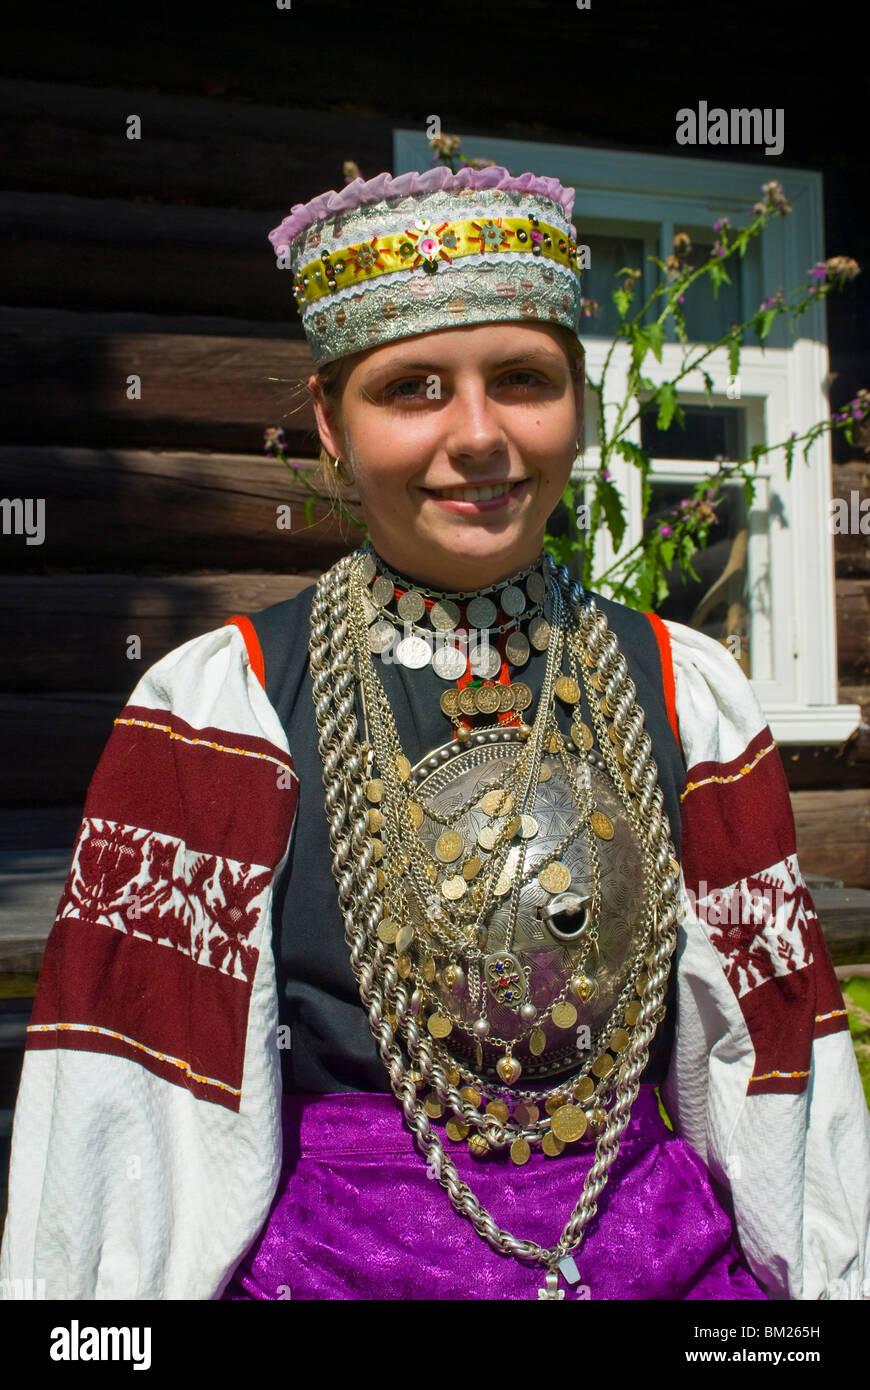 Traditionally dressed Setu woman from a local tribe in South East Estonia, Estonia, Baltic States, Europe Stock Photo